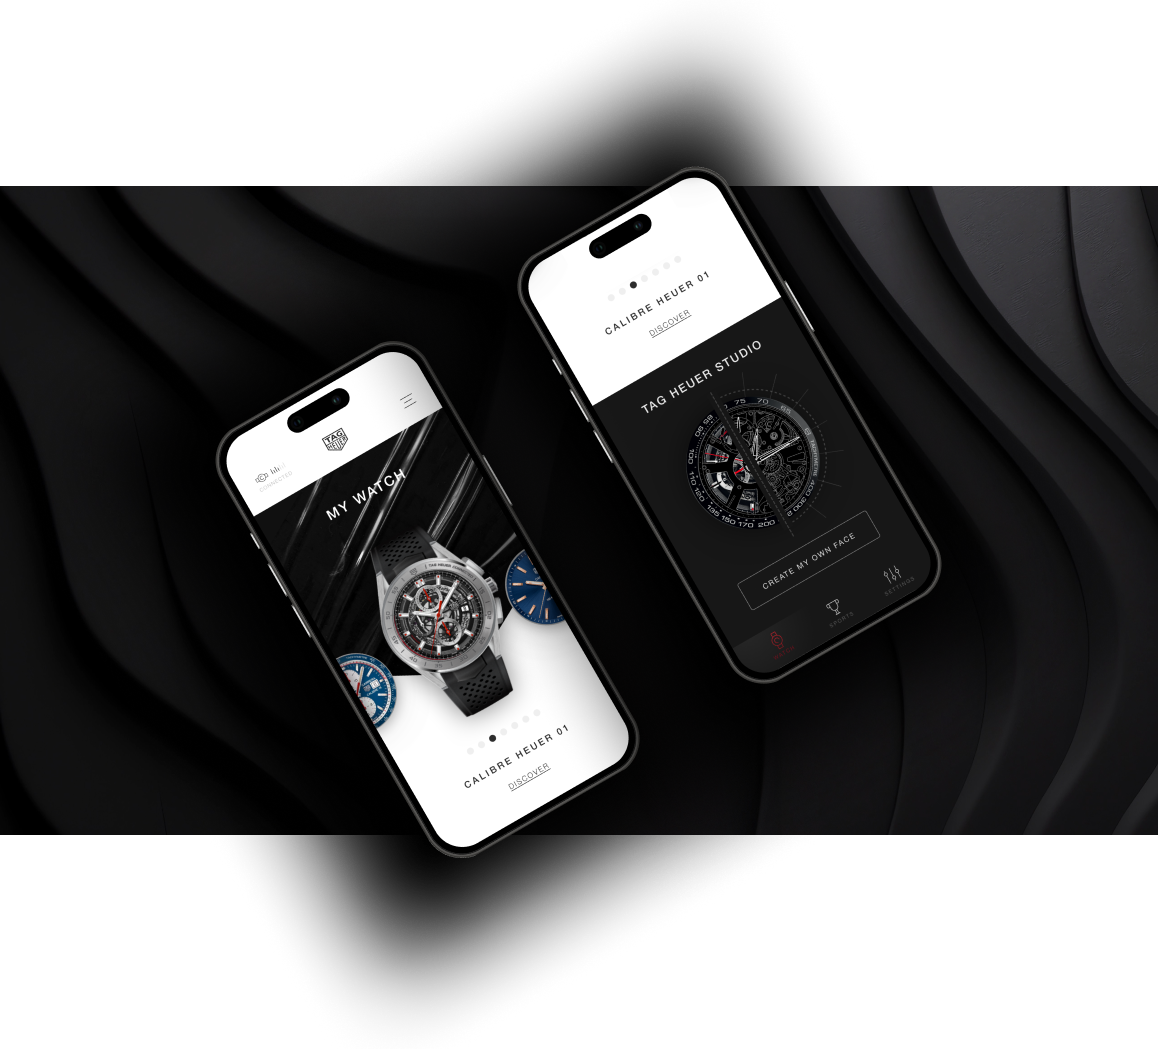 Tag Heuer mobile application